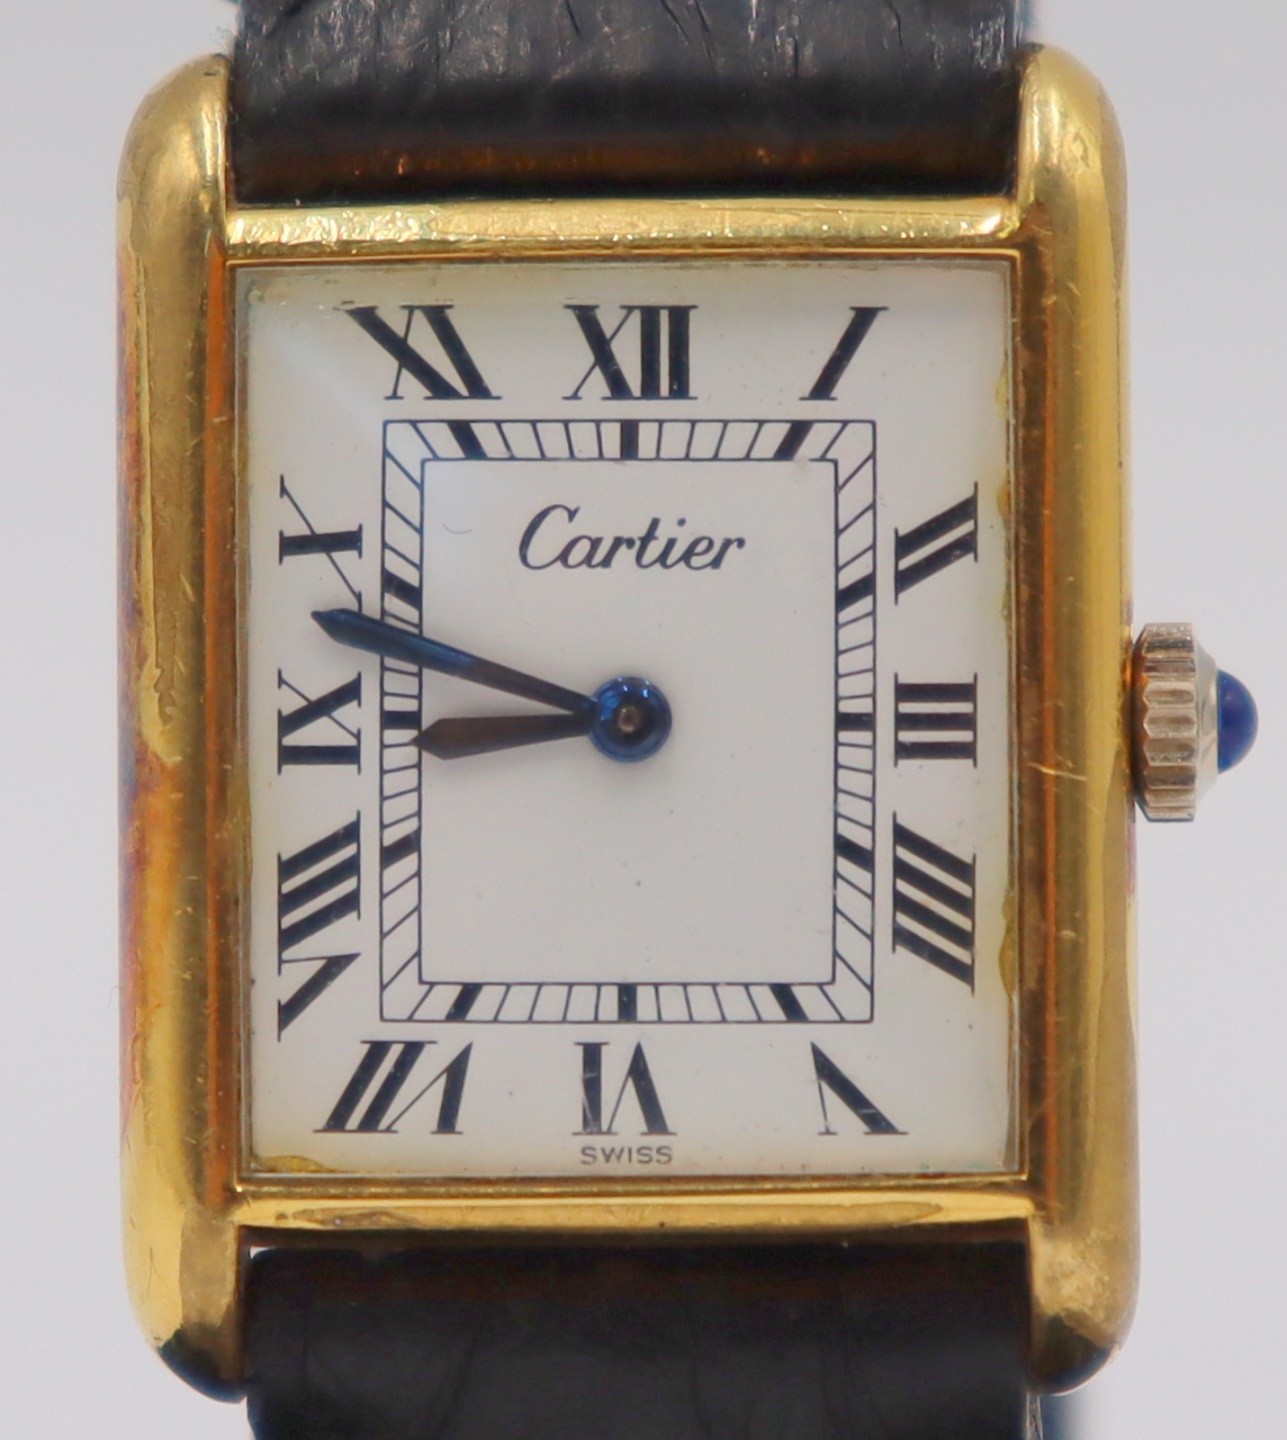 JEWELRY CARTIER GOLD TONE TANK 3bc2fd